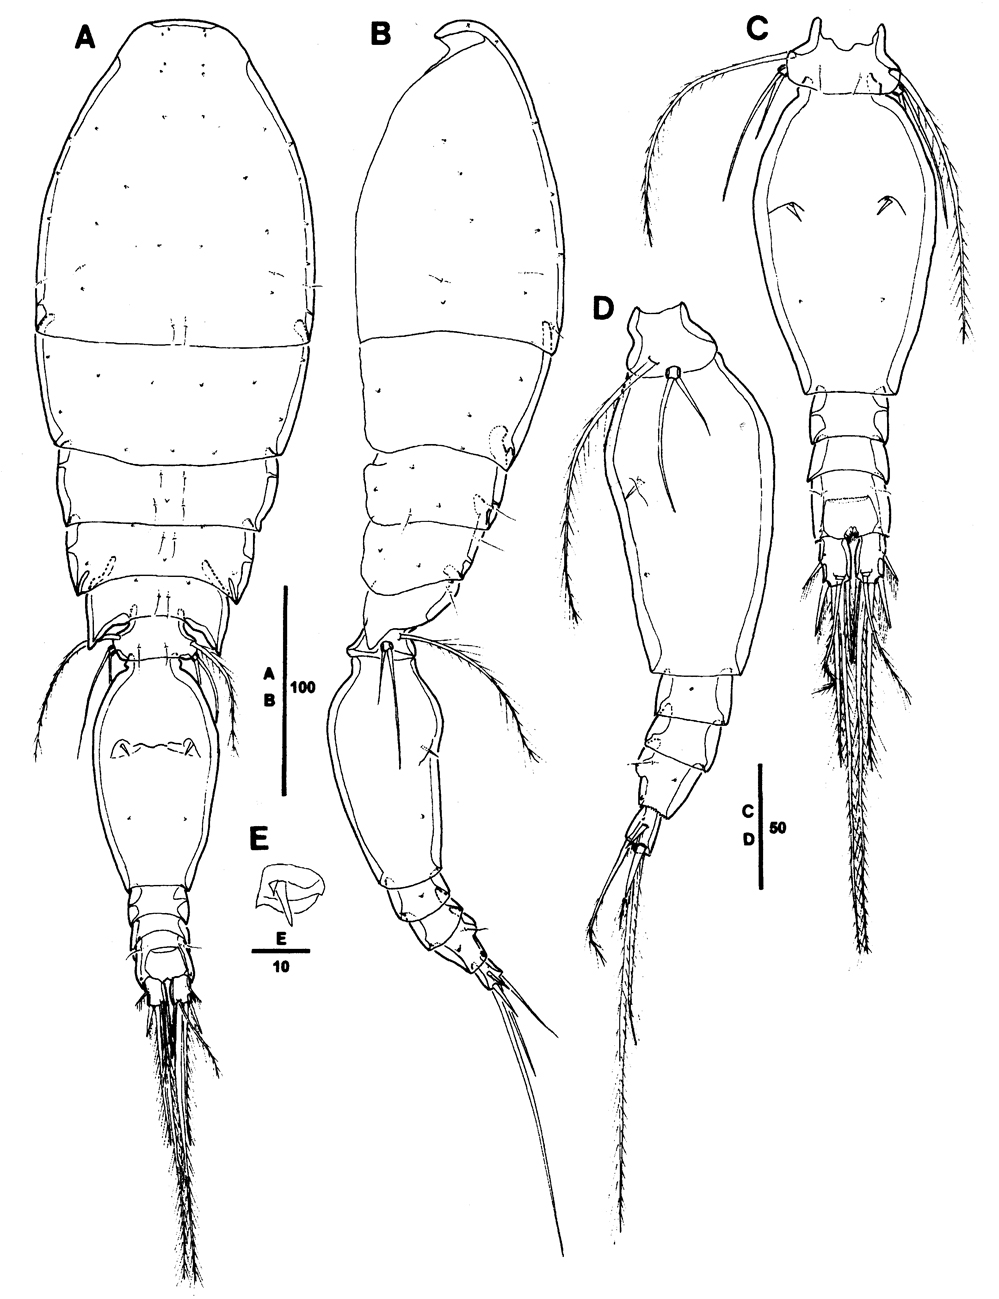 Species Triconia giesbrechti - Plate 4 of morphological figures